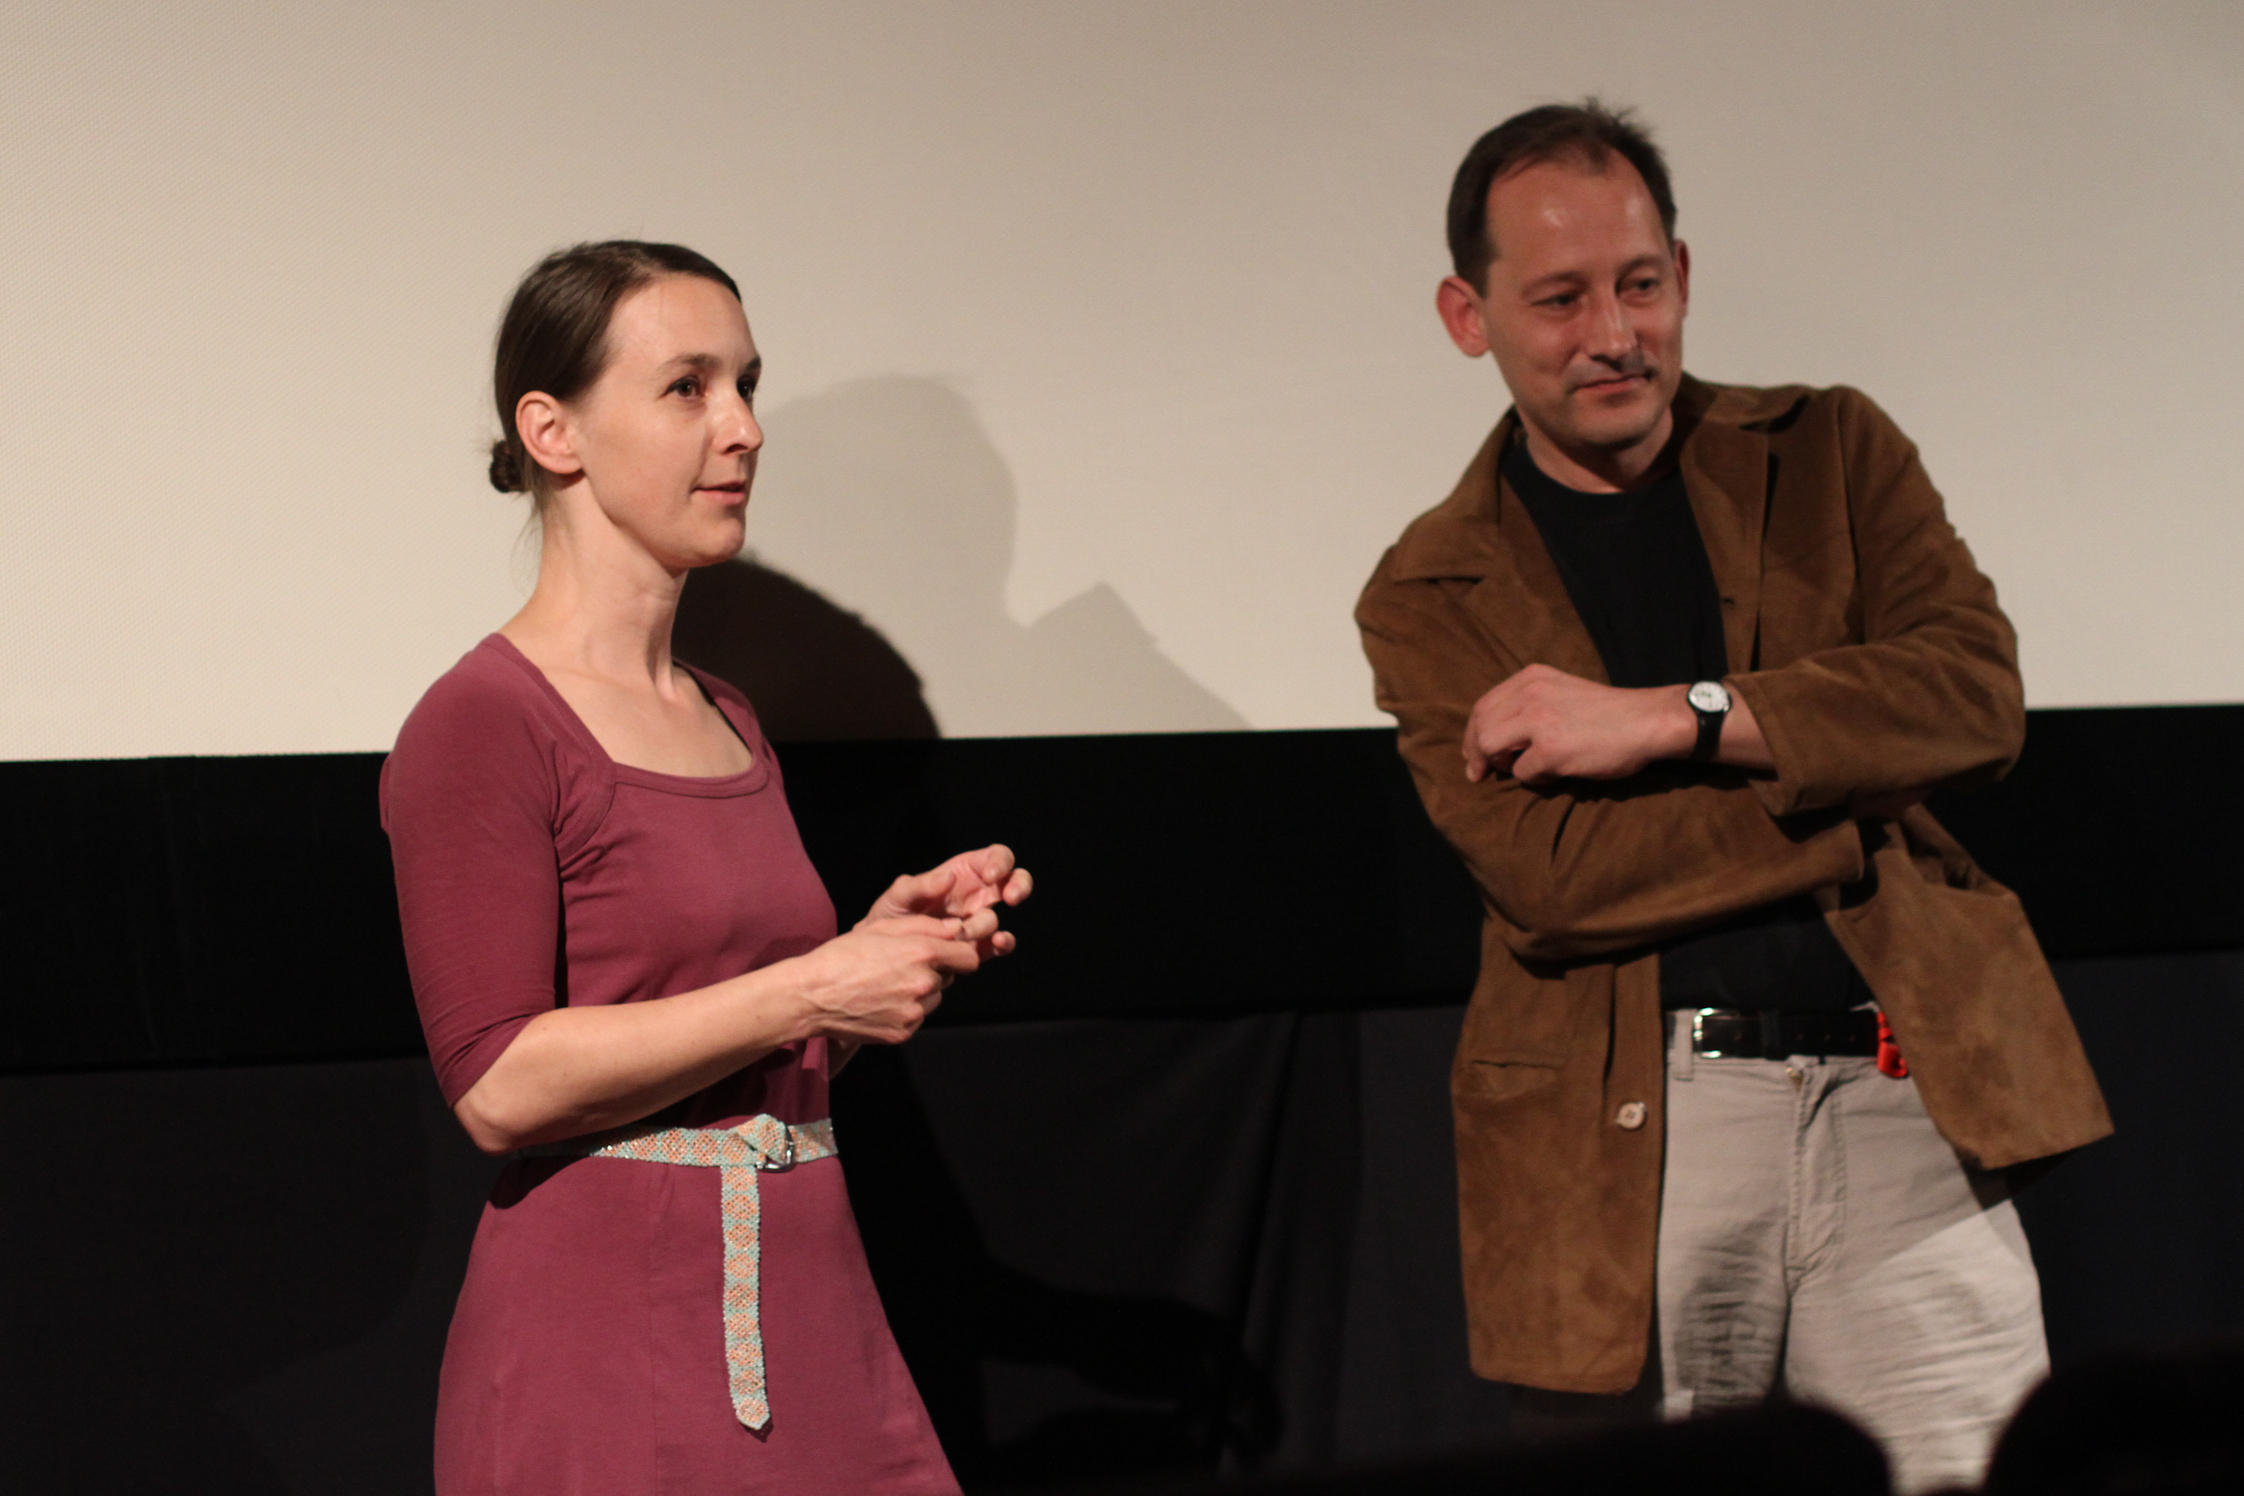 two people speaking and standing in front of a projection screen